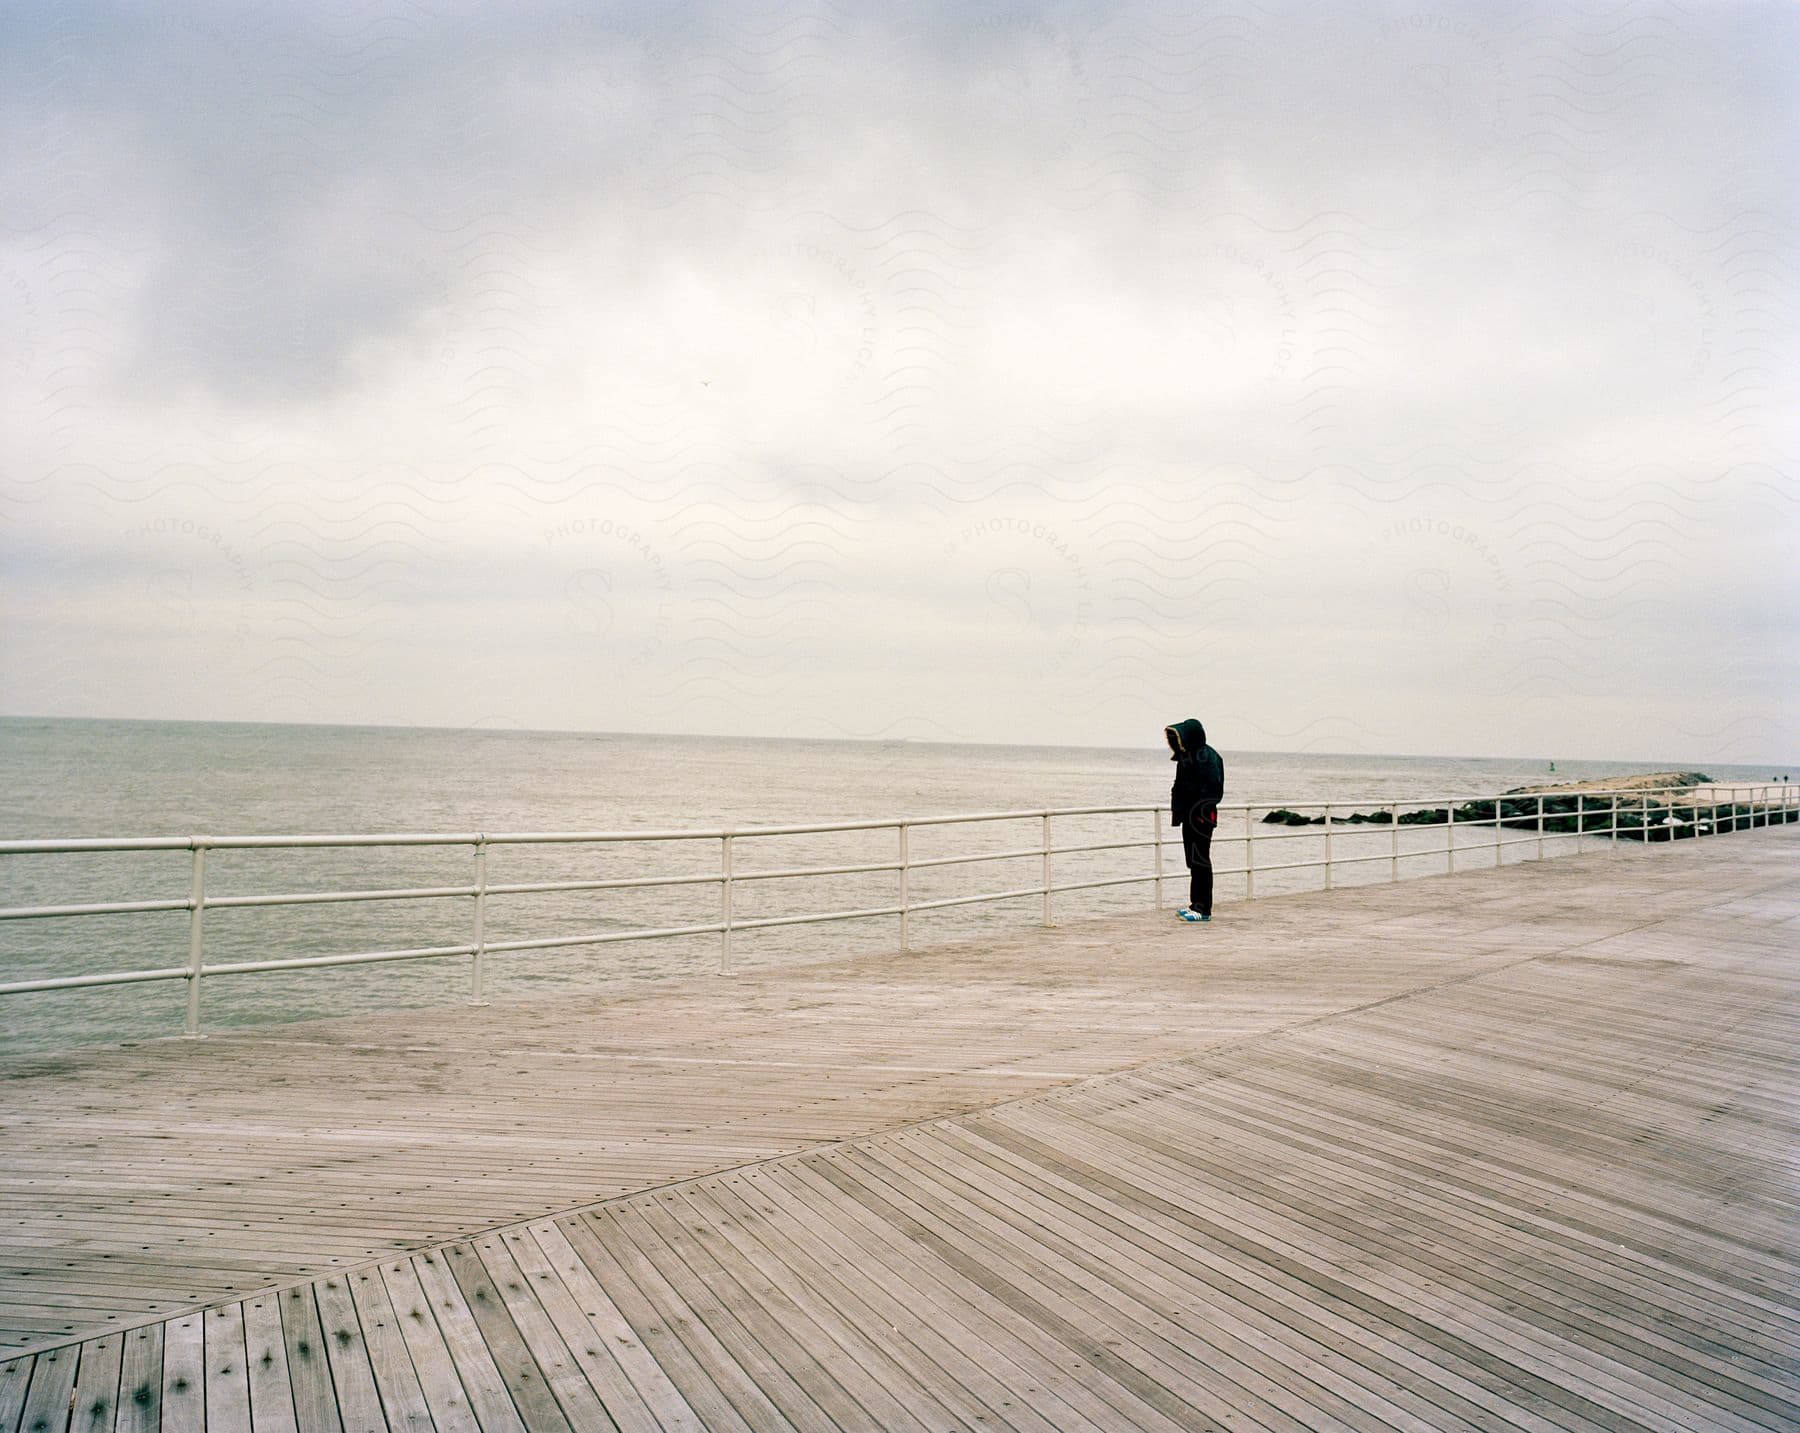 Man On Boardwalk Looking At Water Over Railing Wearing Jeans And Coat On Cloudy Day